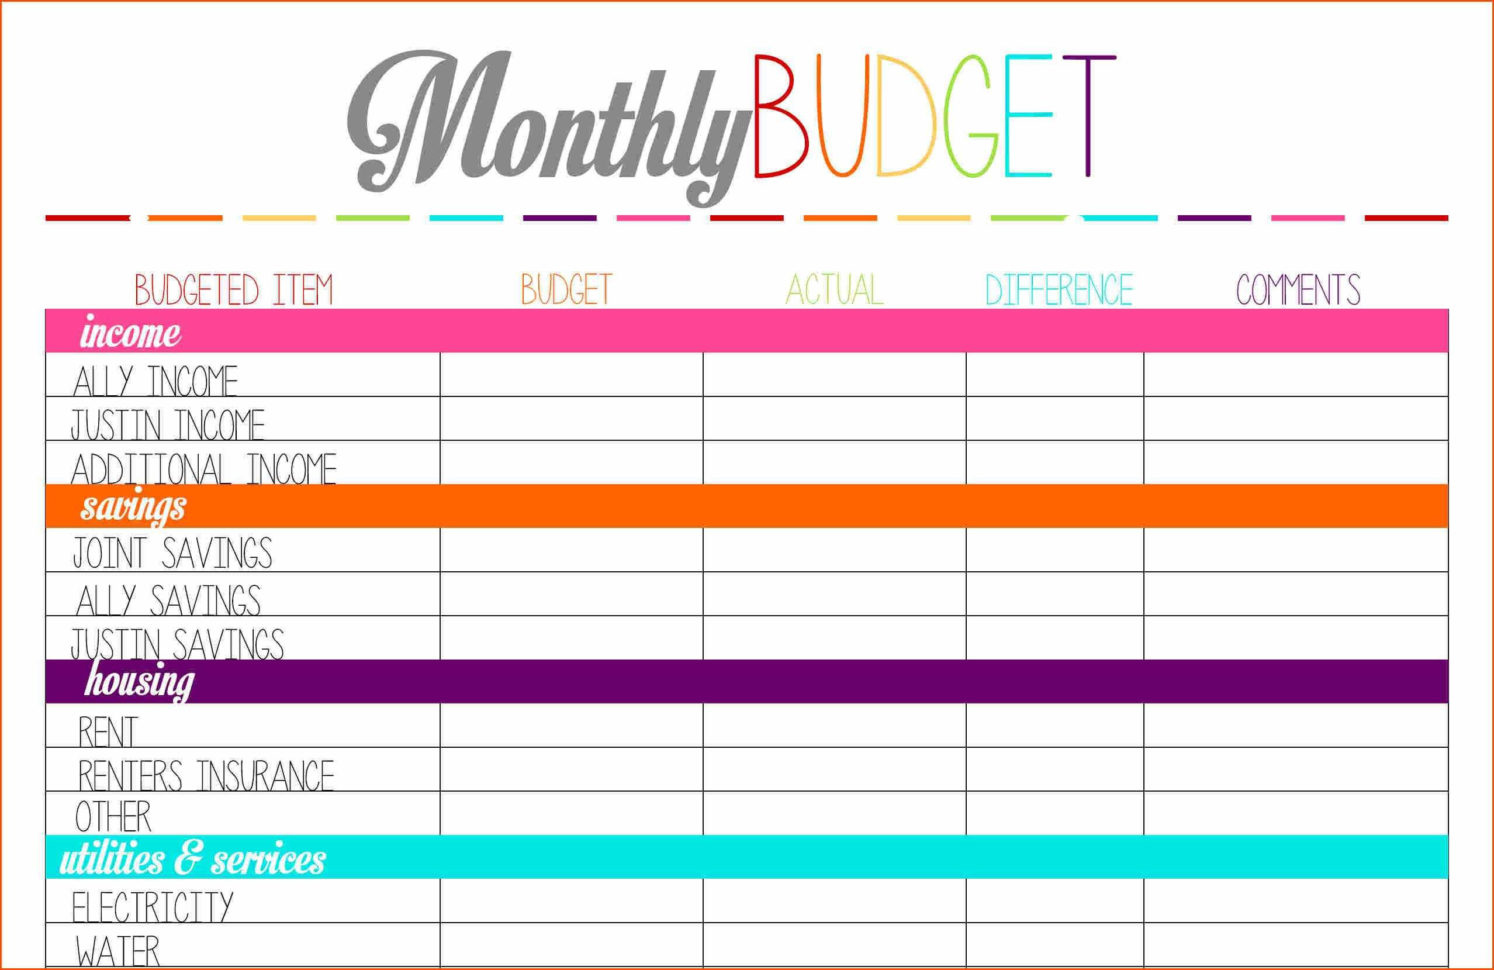 Basic Budget Worksheet For Young Adults Db excel